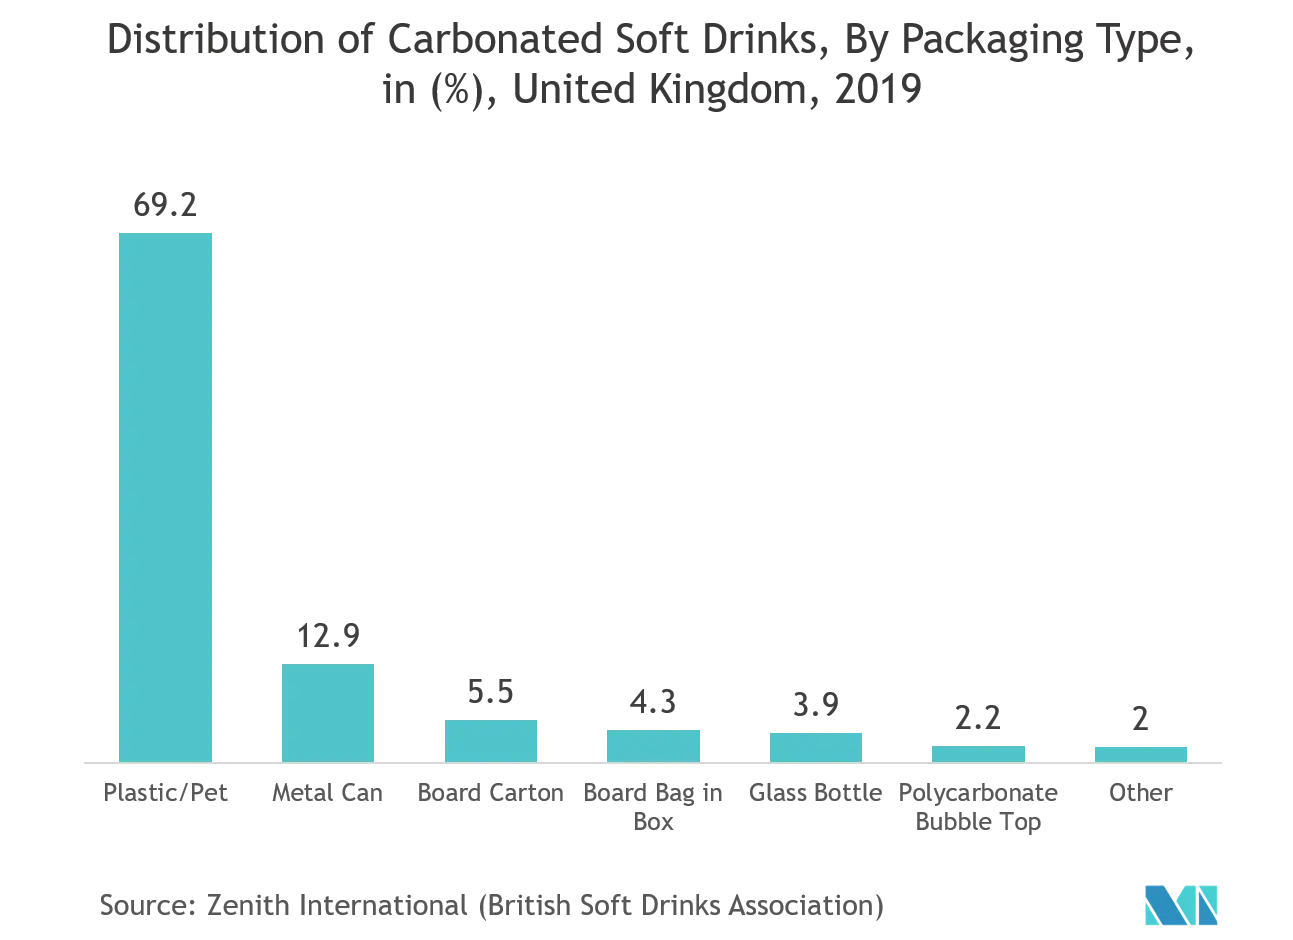 Europe Package Testing Market : Distribution of Carbonated Soft Drinks, By Packaging Type, in (%), United Kingdom, 2019